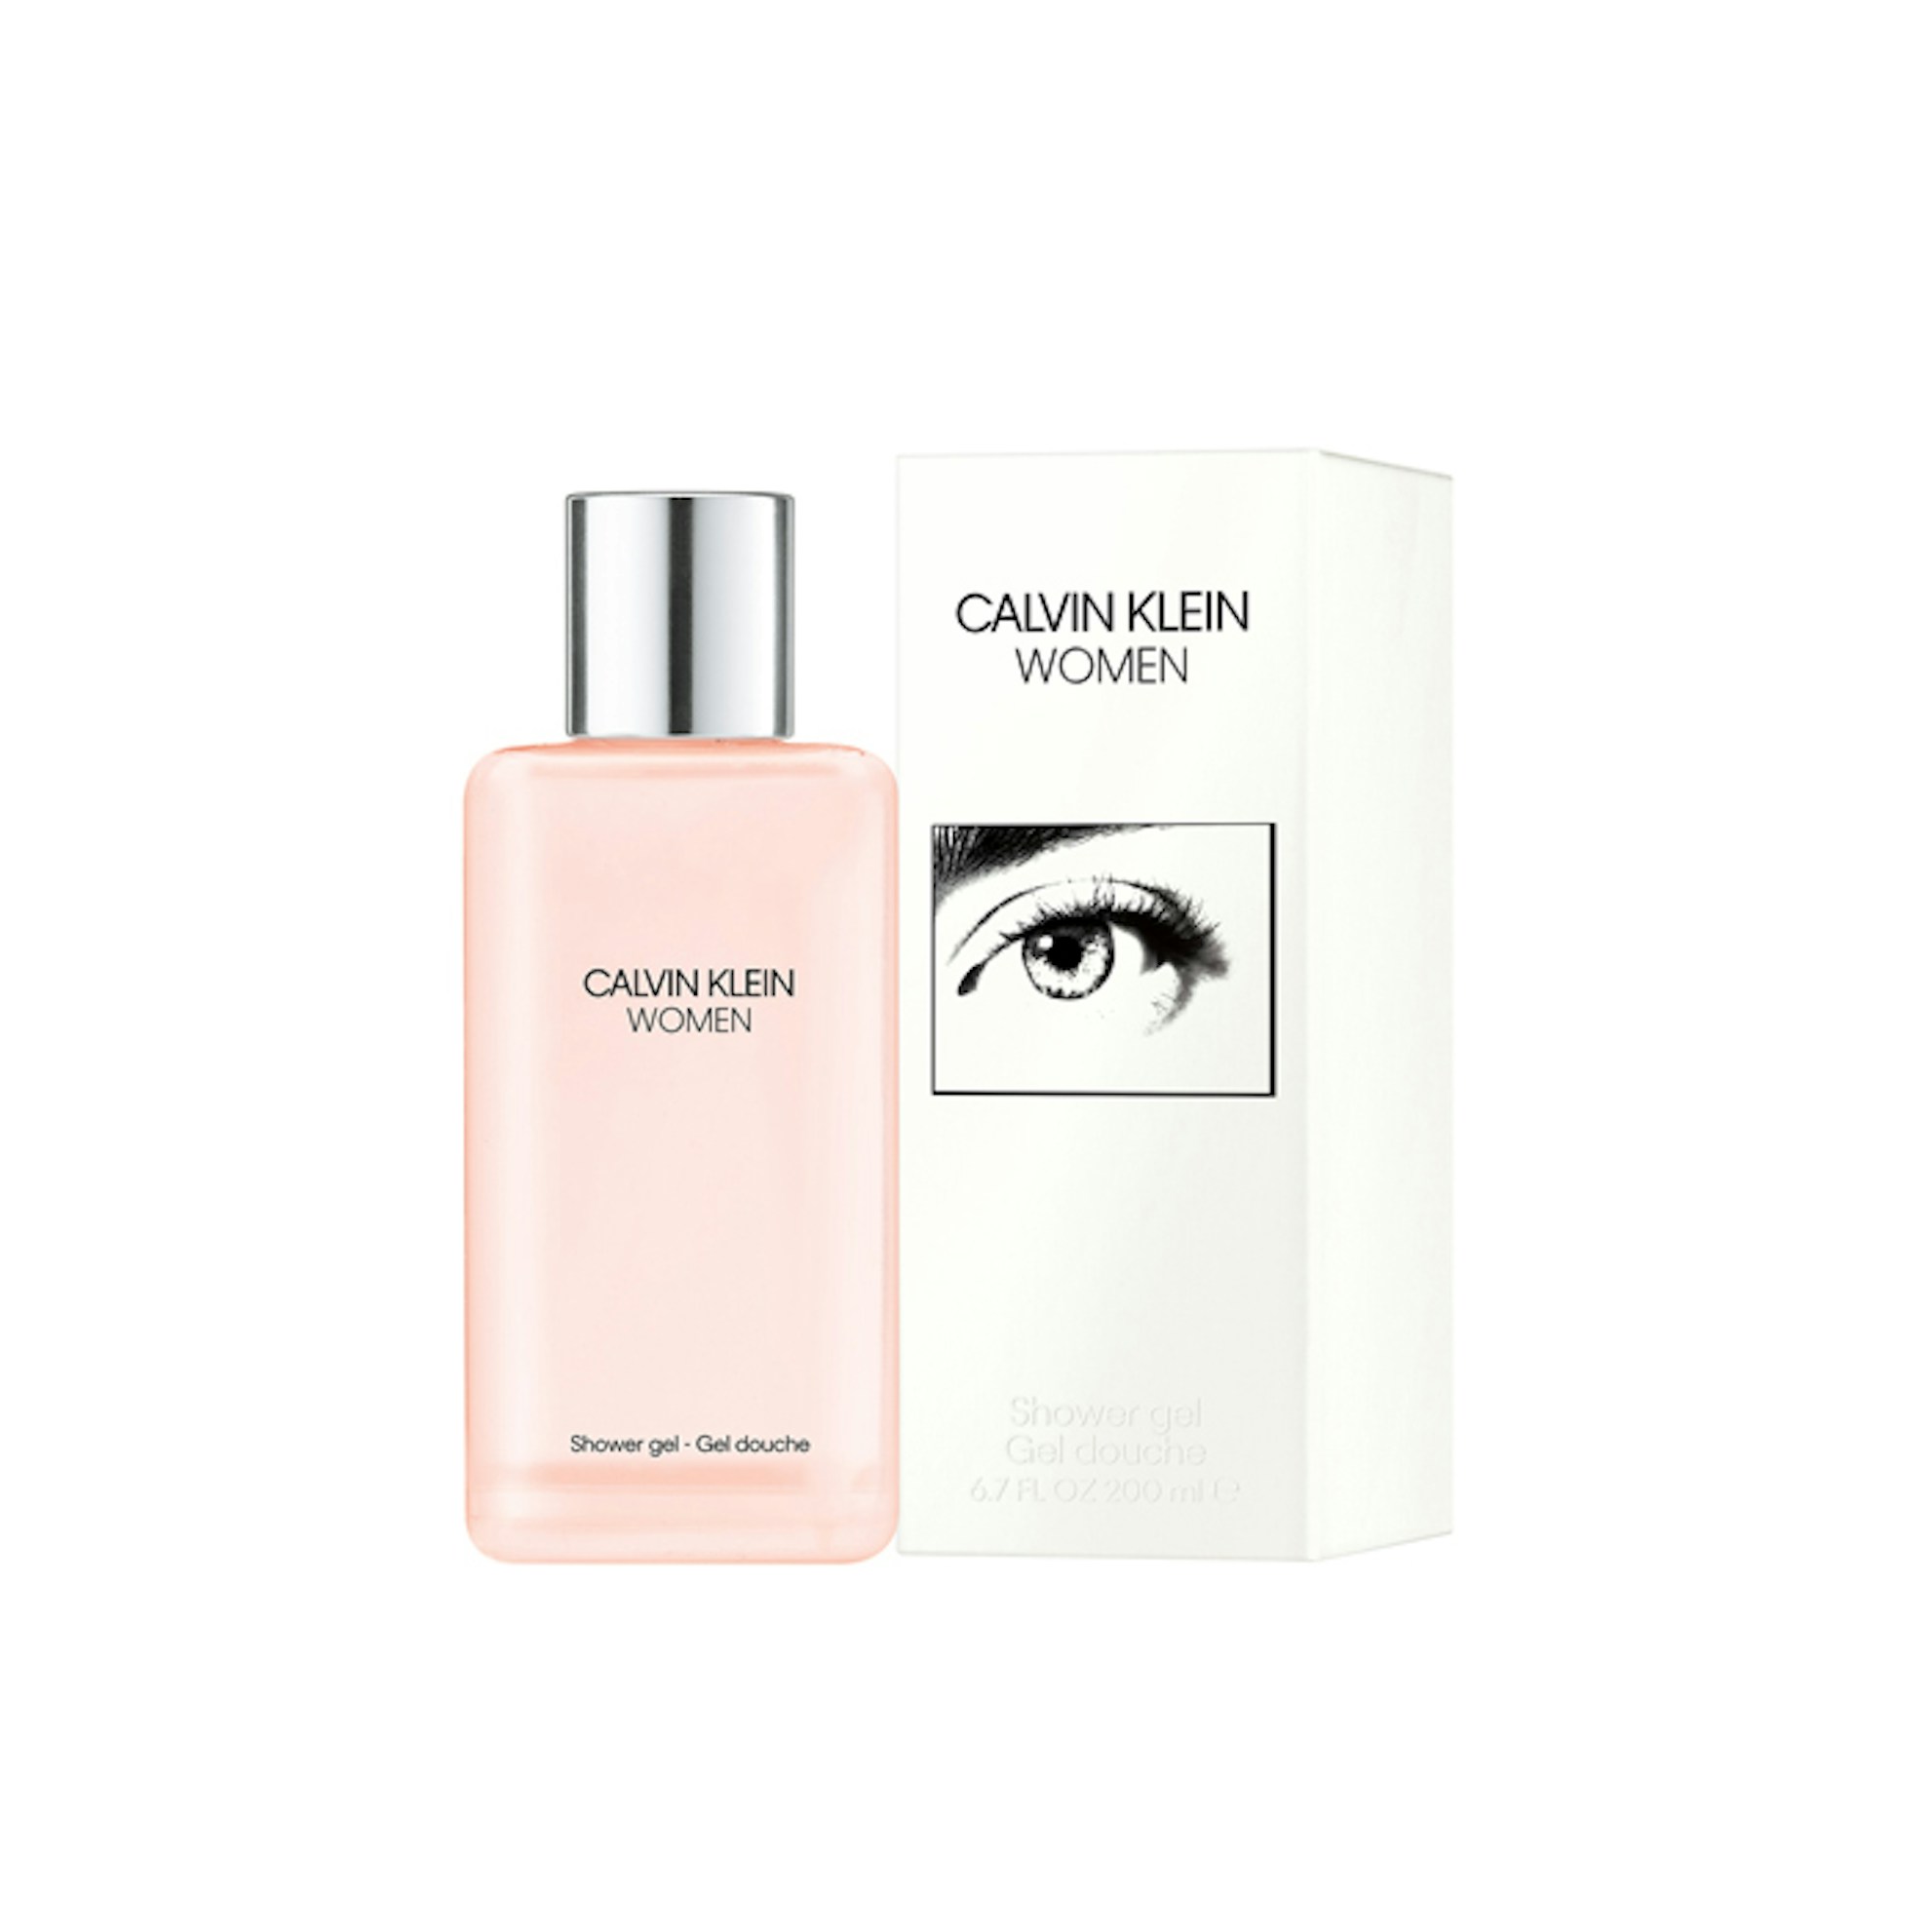 Calvin Klein Shower Gel 200ml Body Products | The Fragrance Shop